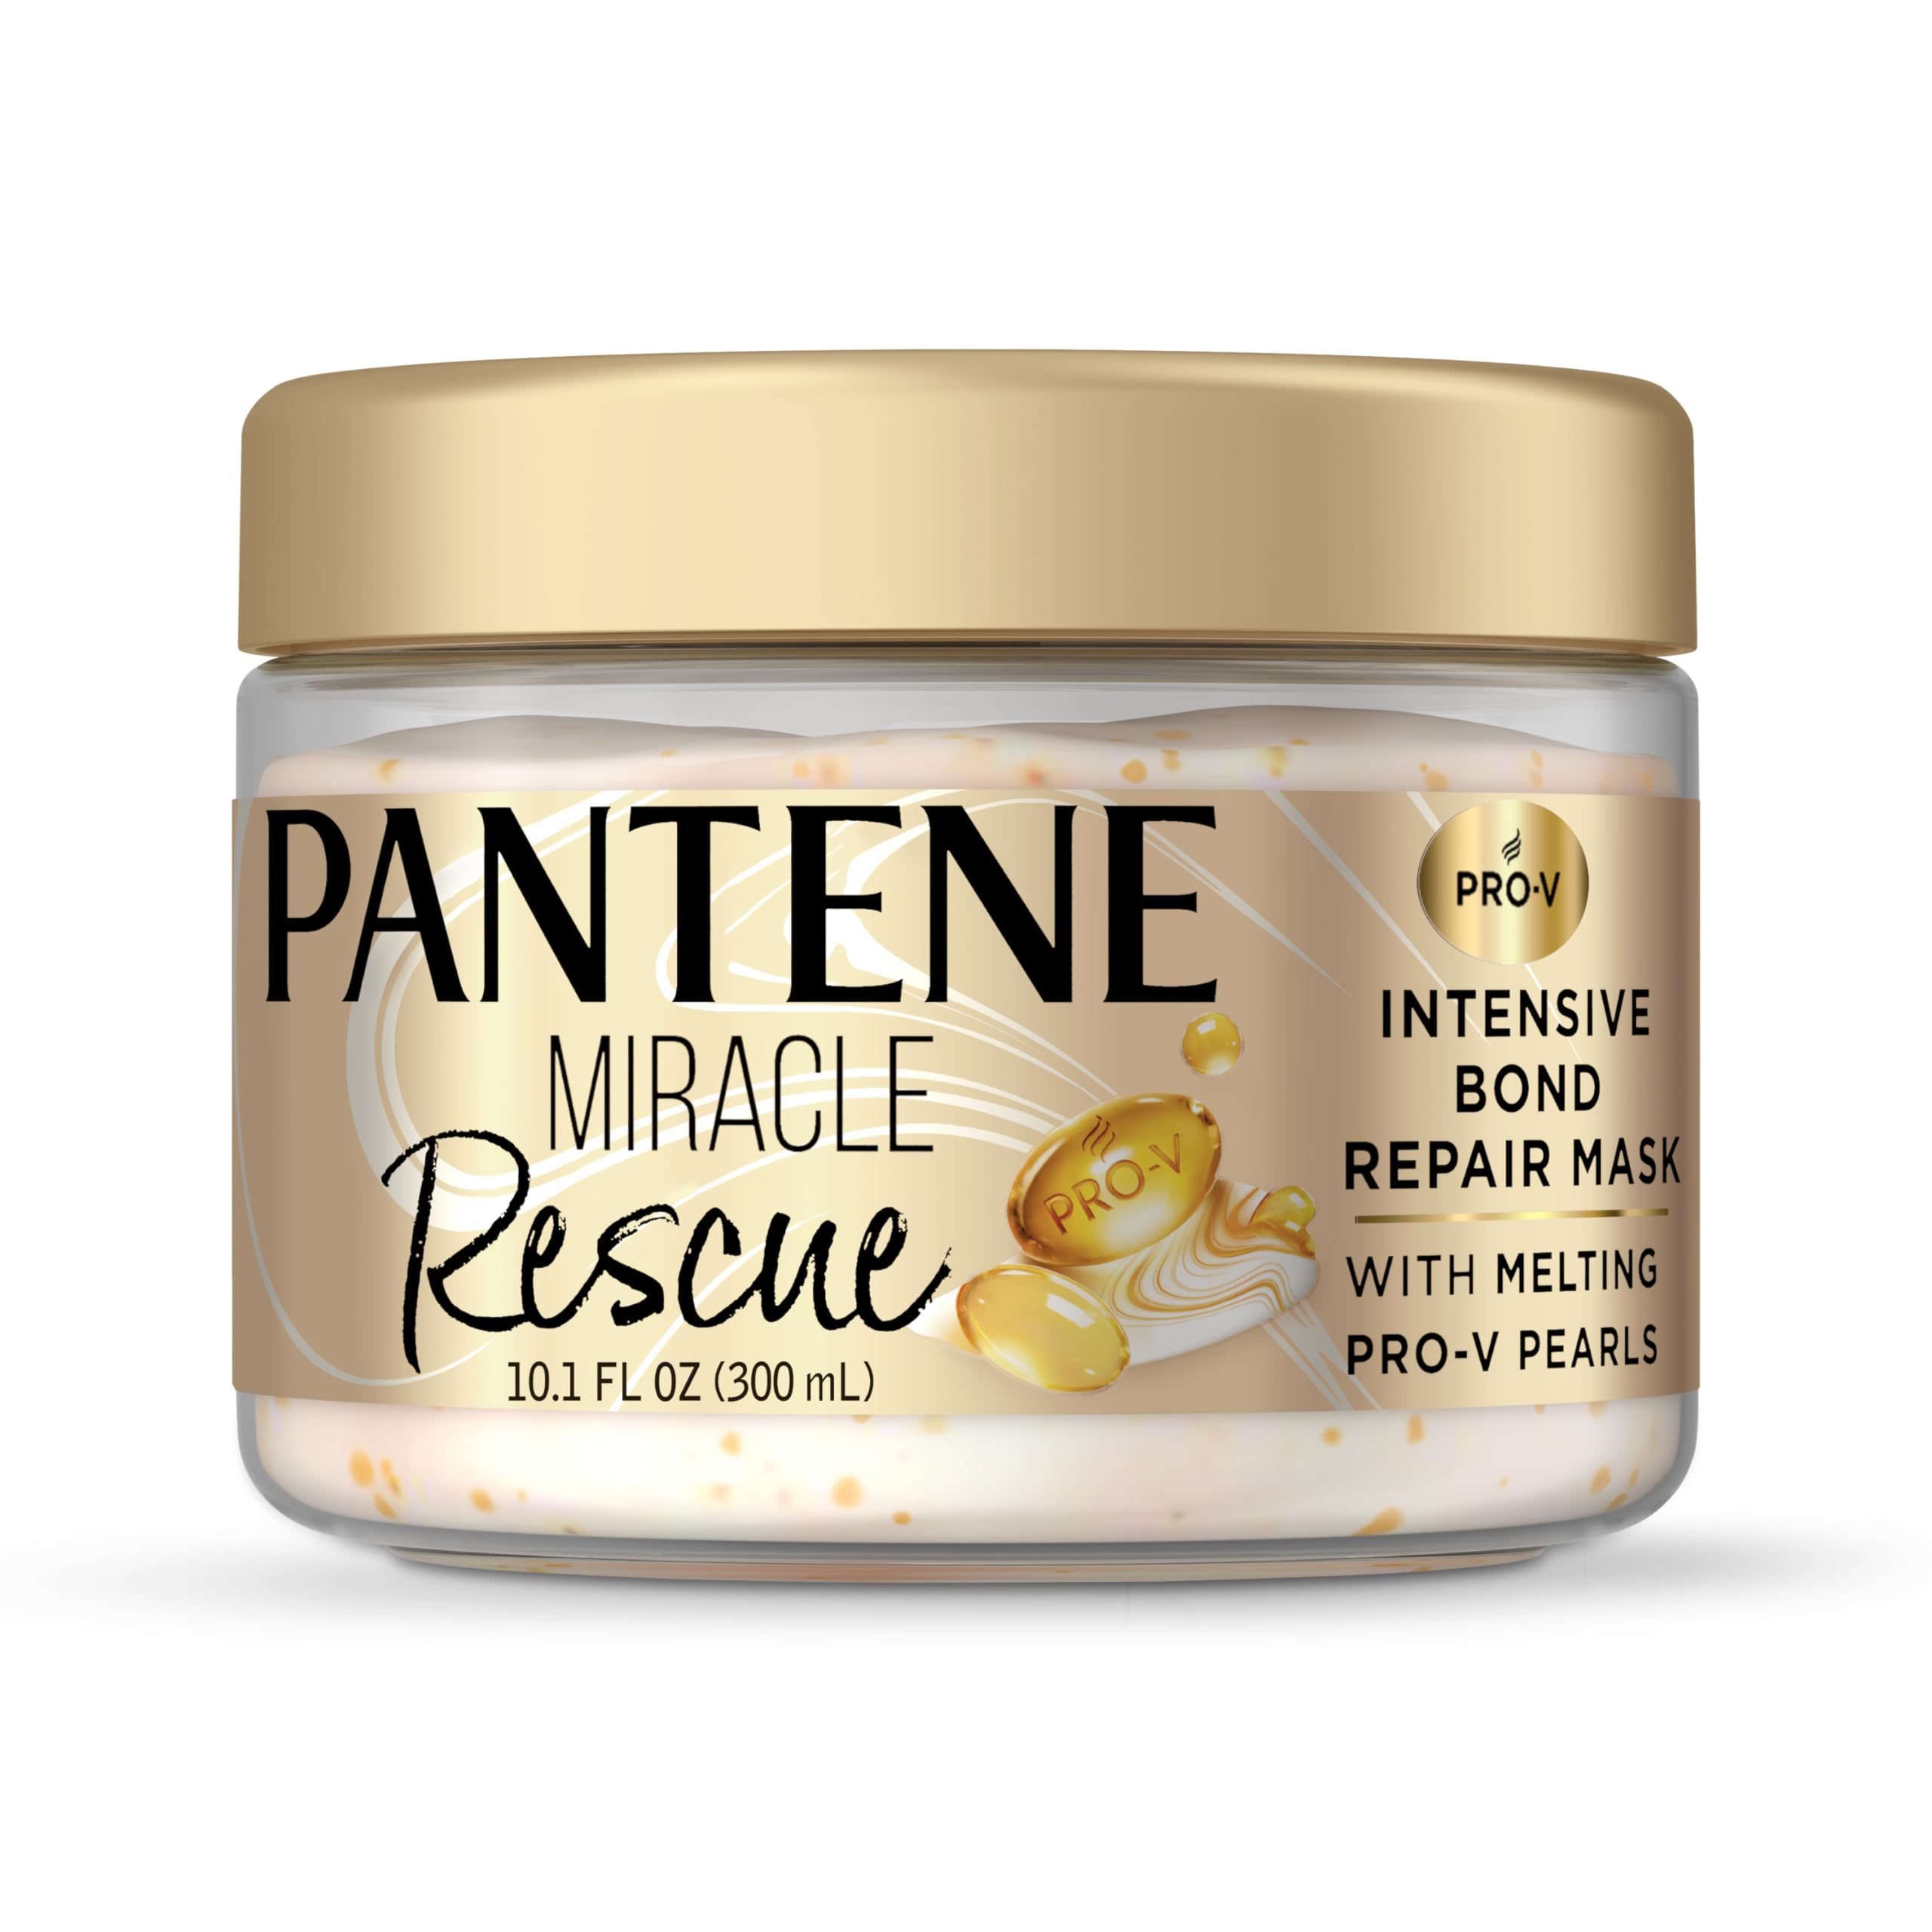 10.1-Oz Pantene Miracle Rescue Hair Mask $7.57 w/ S&S + Free Shipping w/ Prime or on $35+